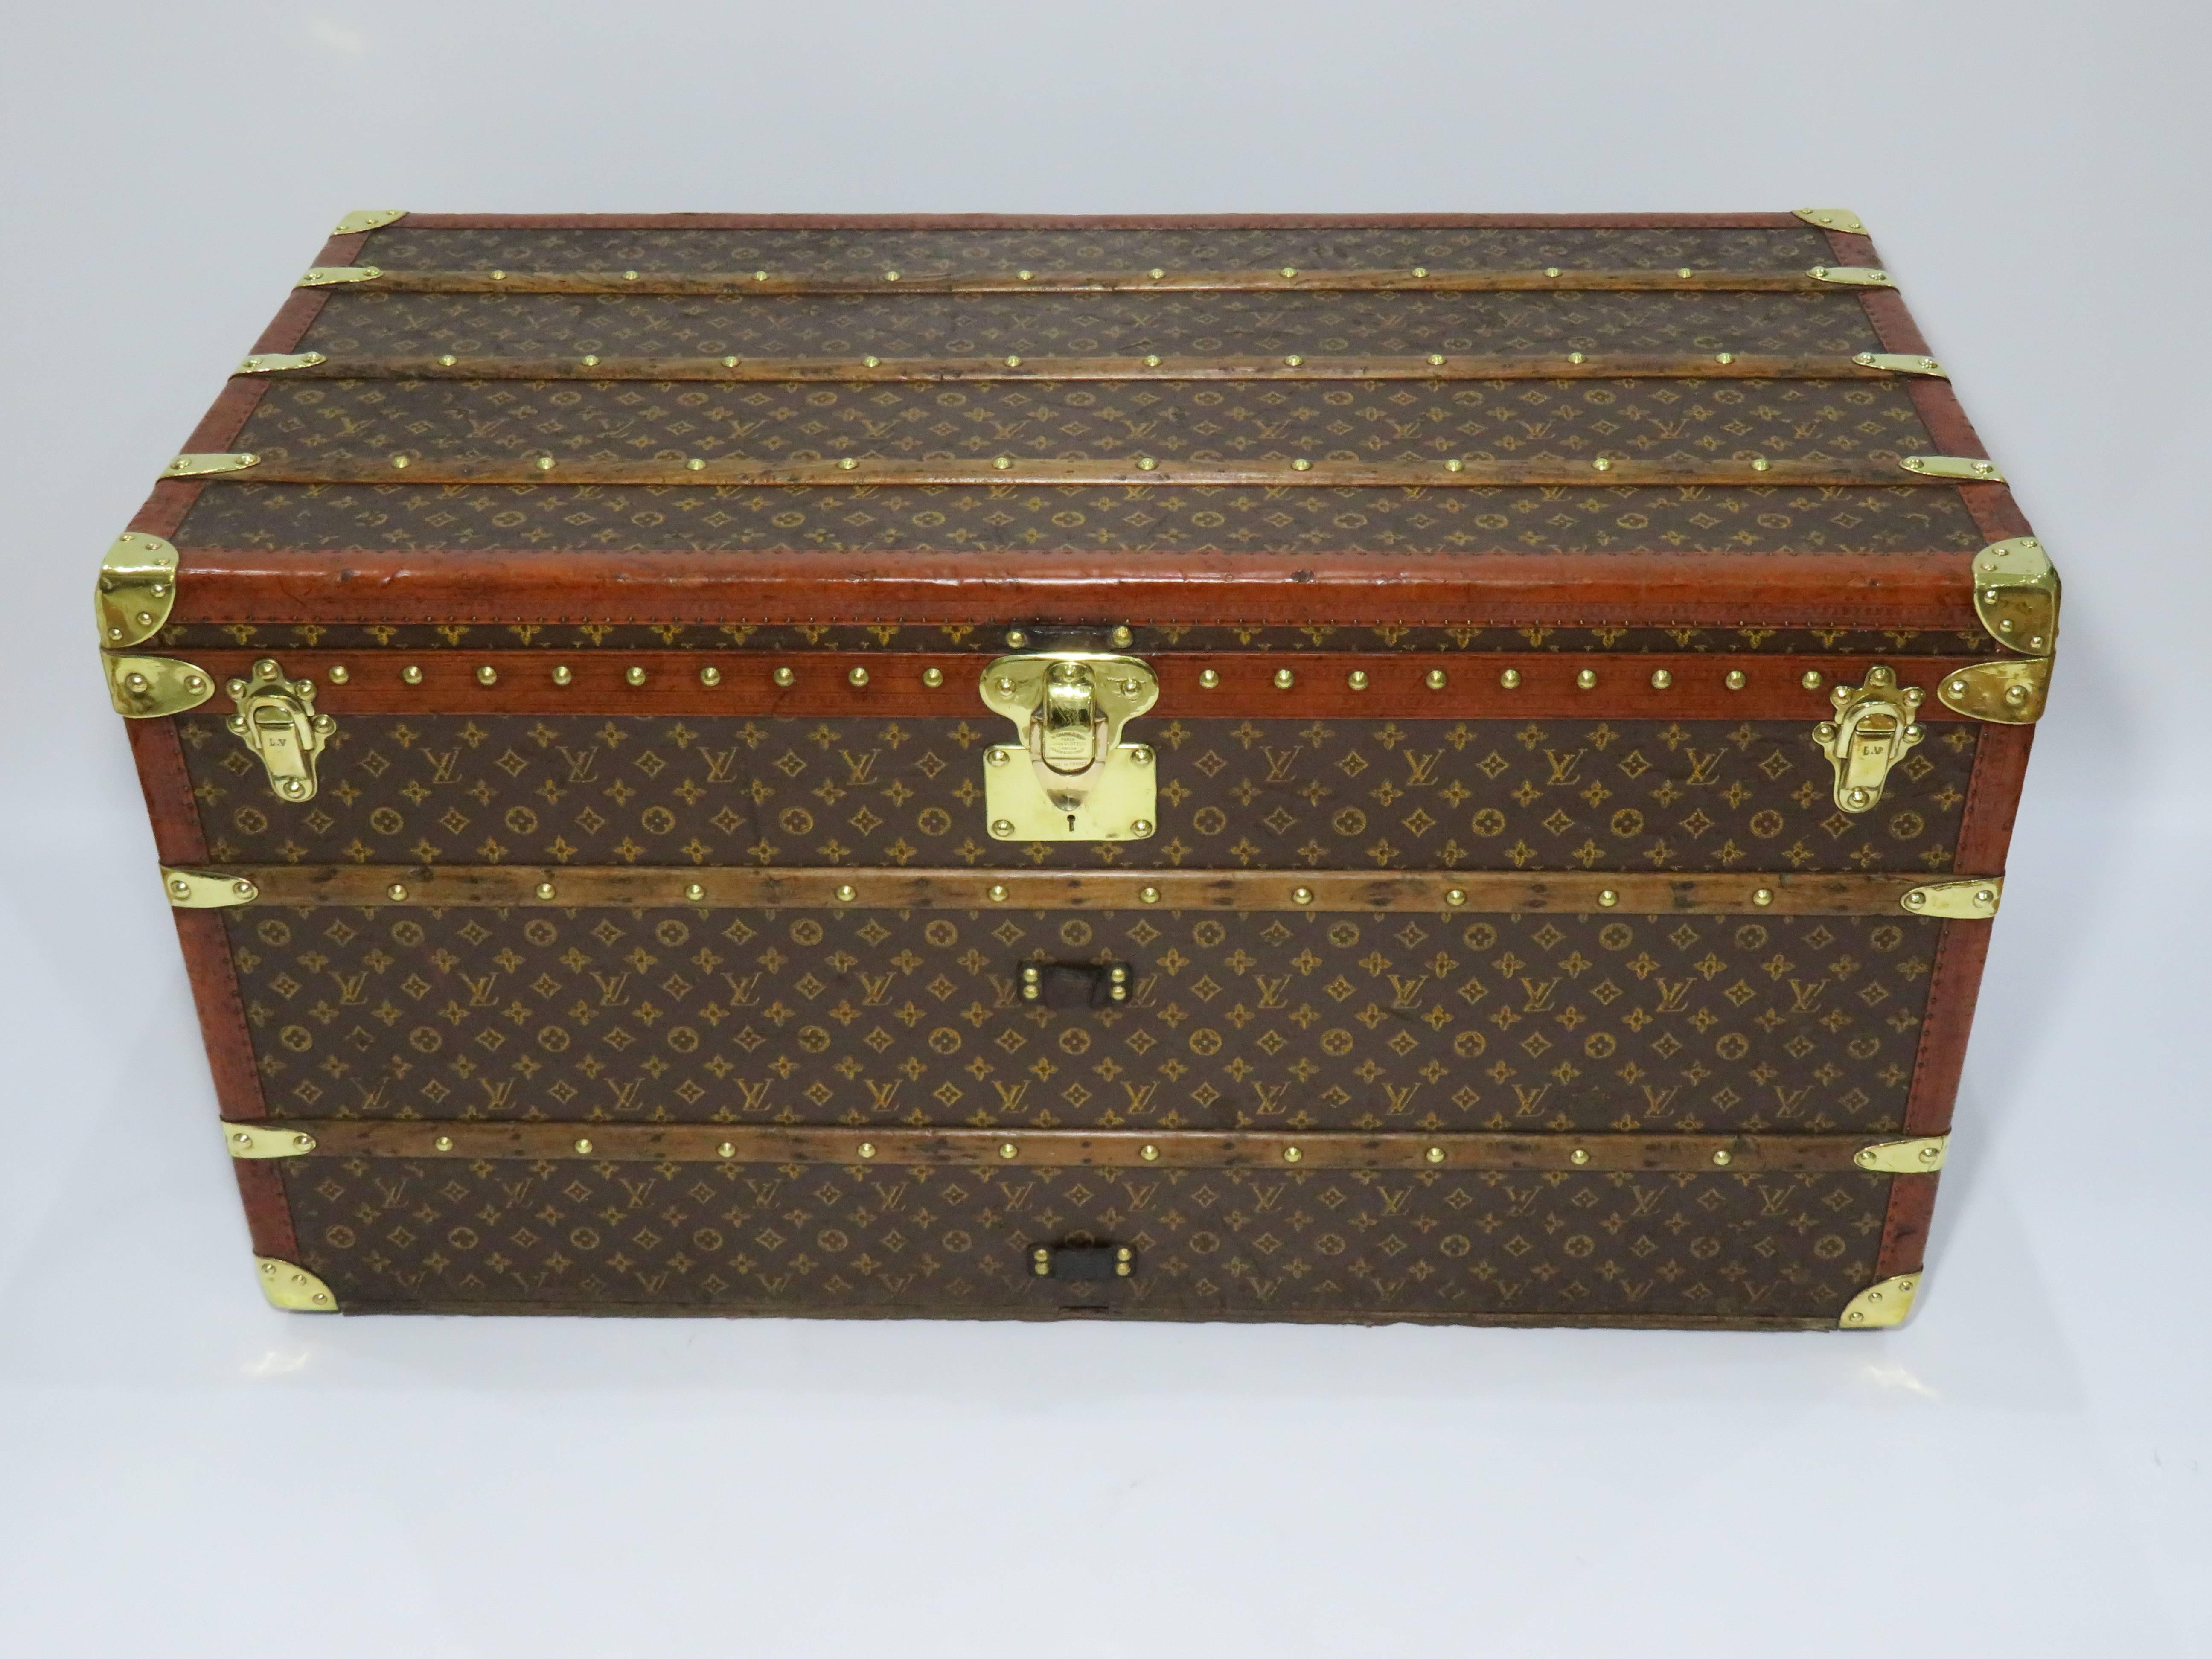 Courier Louis Vuitton trunk in very good condition, made in 1920s and finished in monogram canvas, brass hardware and lozine.

Comes with complete interior and with the initial "H" and number "5" on both sides.

Dimensions are